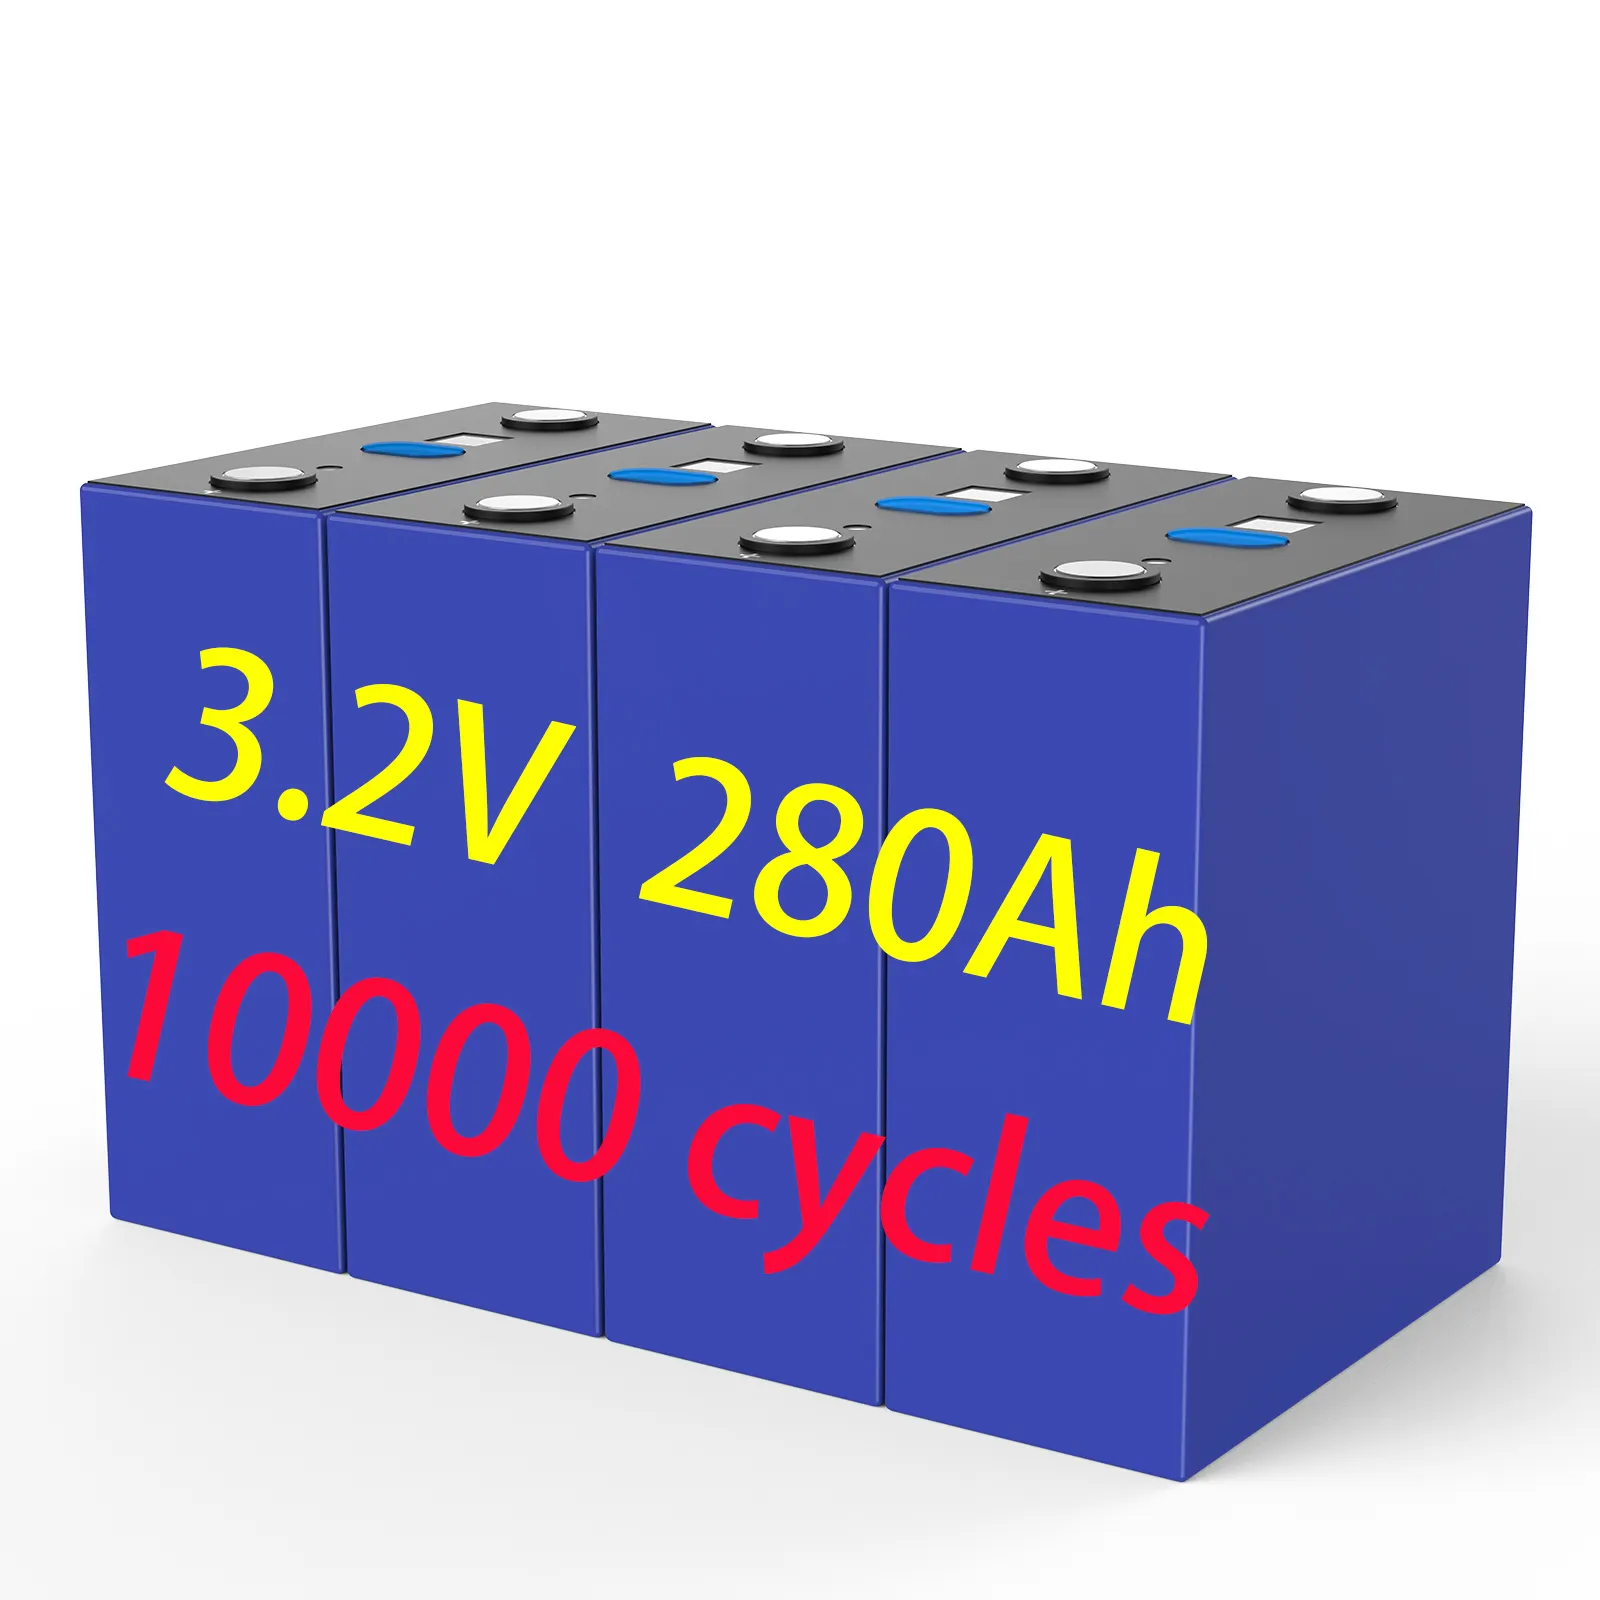 10000 Cycle life 280Ah LiFePO4 Battery 3.2V Rechargeable Prismatic Energy Storage Battery Solar Lithium ion Batteries